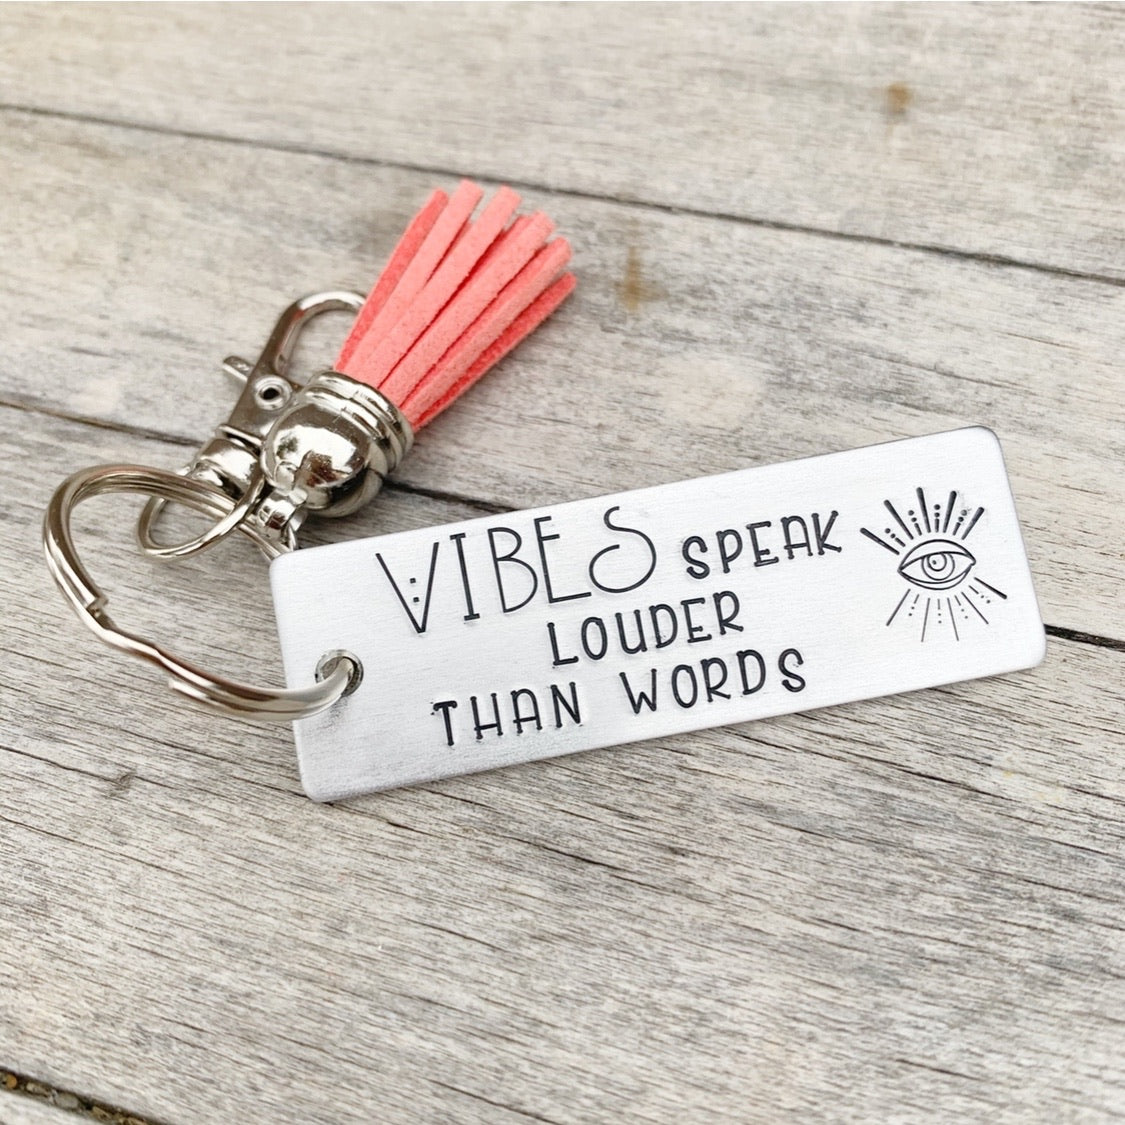 Key chain - Large Rectangle -  Vibes speak louder than words